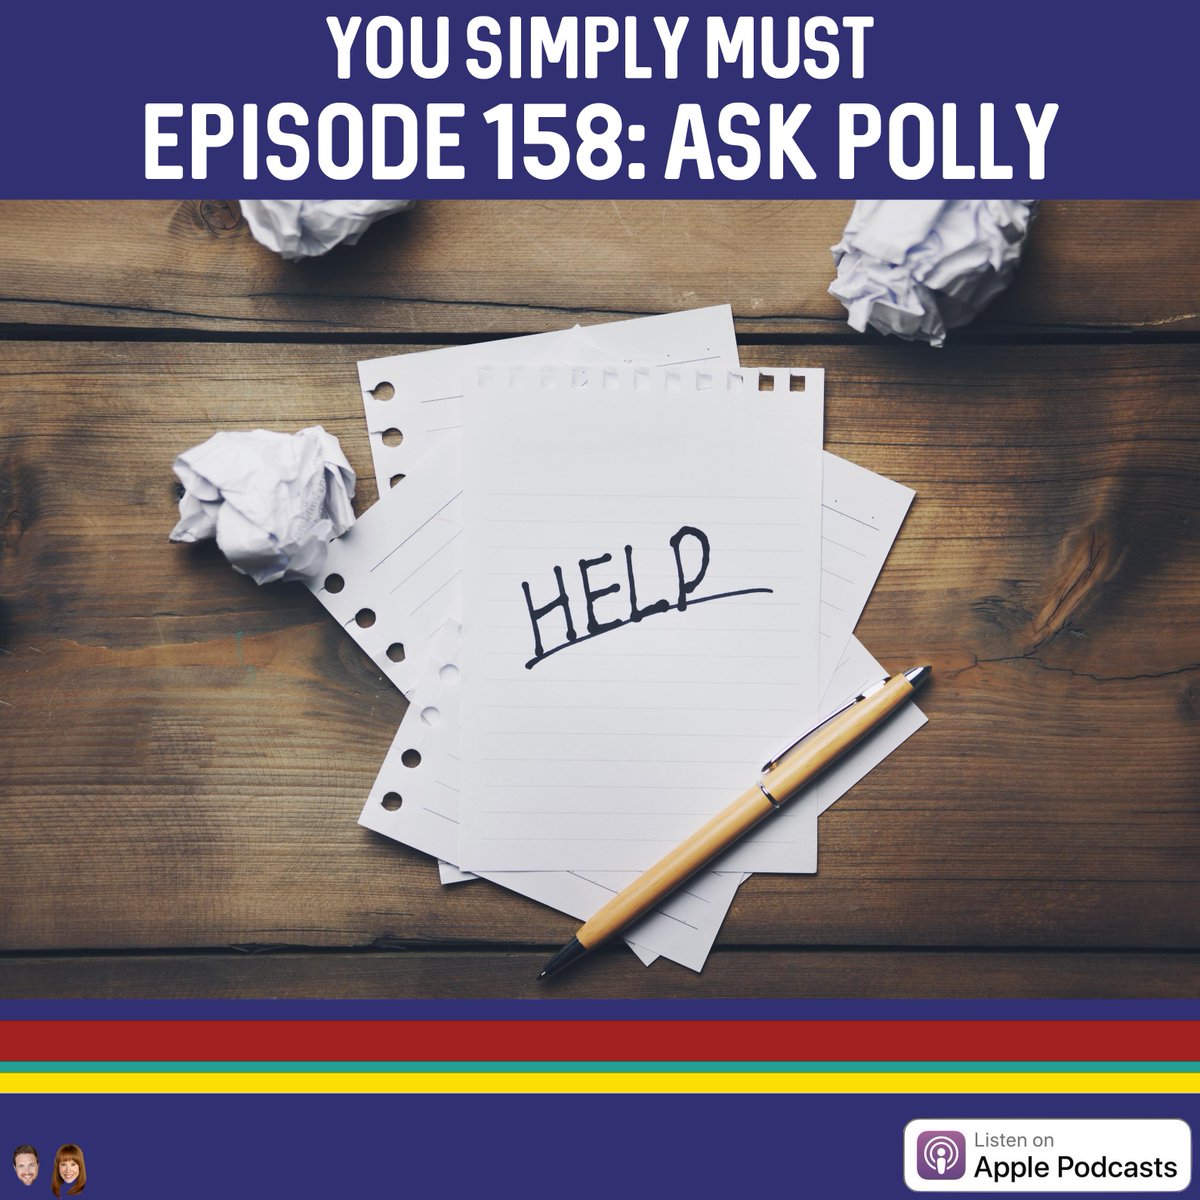 Got a question? Don't look at us. Ask Polly!

Listen on Apple Podcasts, Google Play, Spotify, or at bit.ly/YSMEpisode158

#podernfamily #podcasts #comedy #advice #advicecolumn #askpolly @hhavrilesky @thecut @nymag